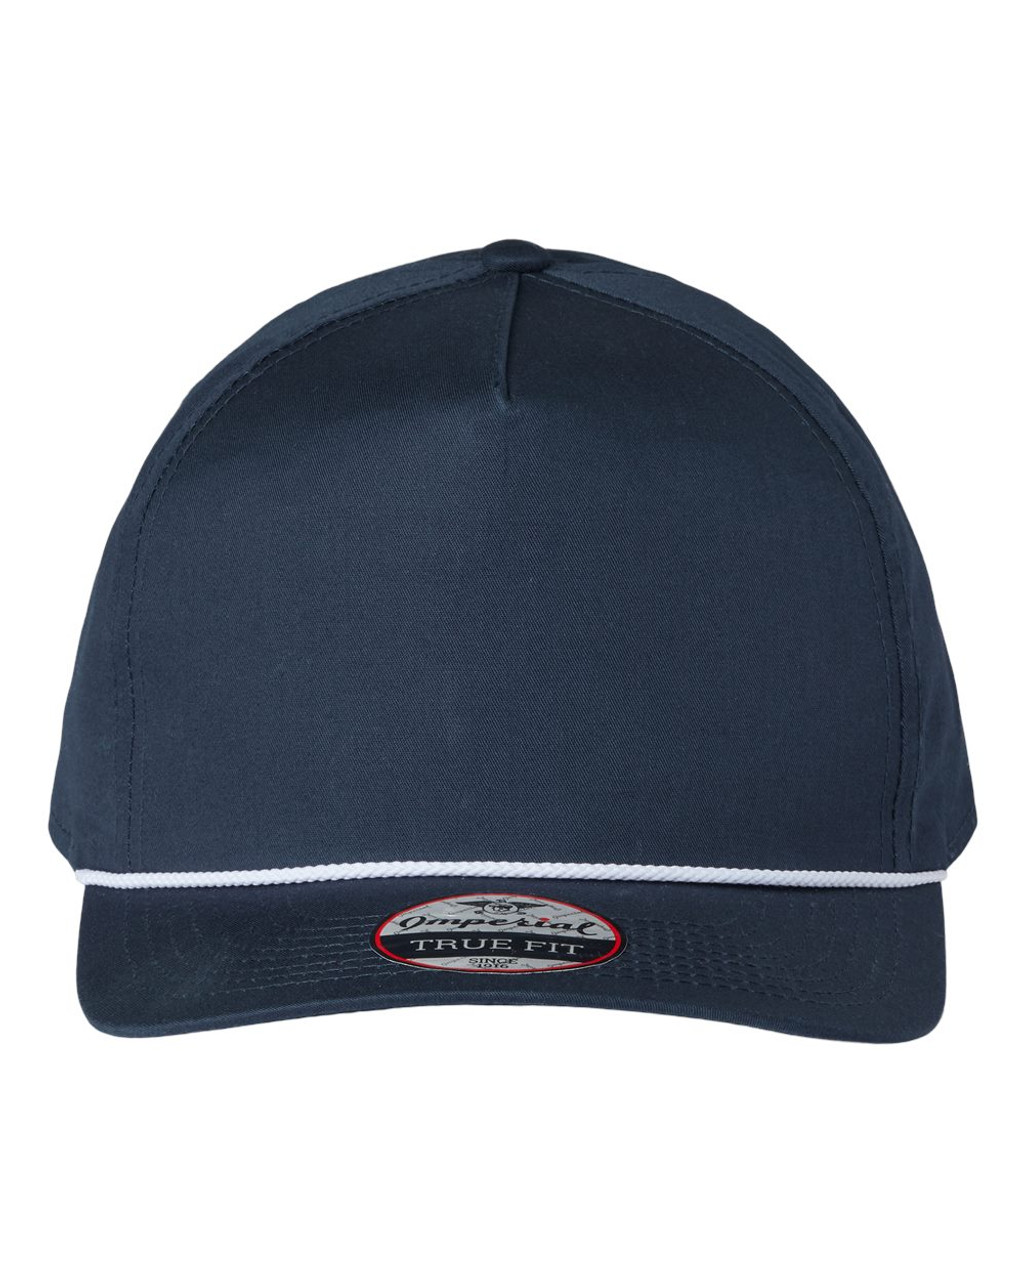 Imperial - The Barnes Cap - 5056 Navy/White